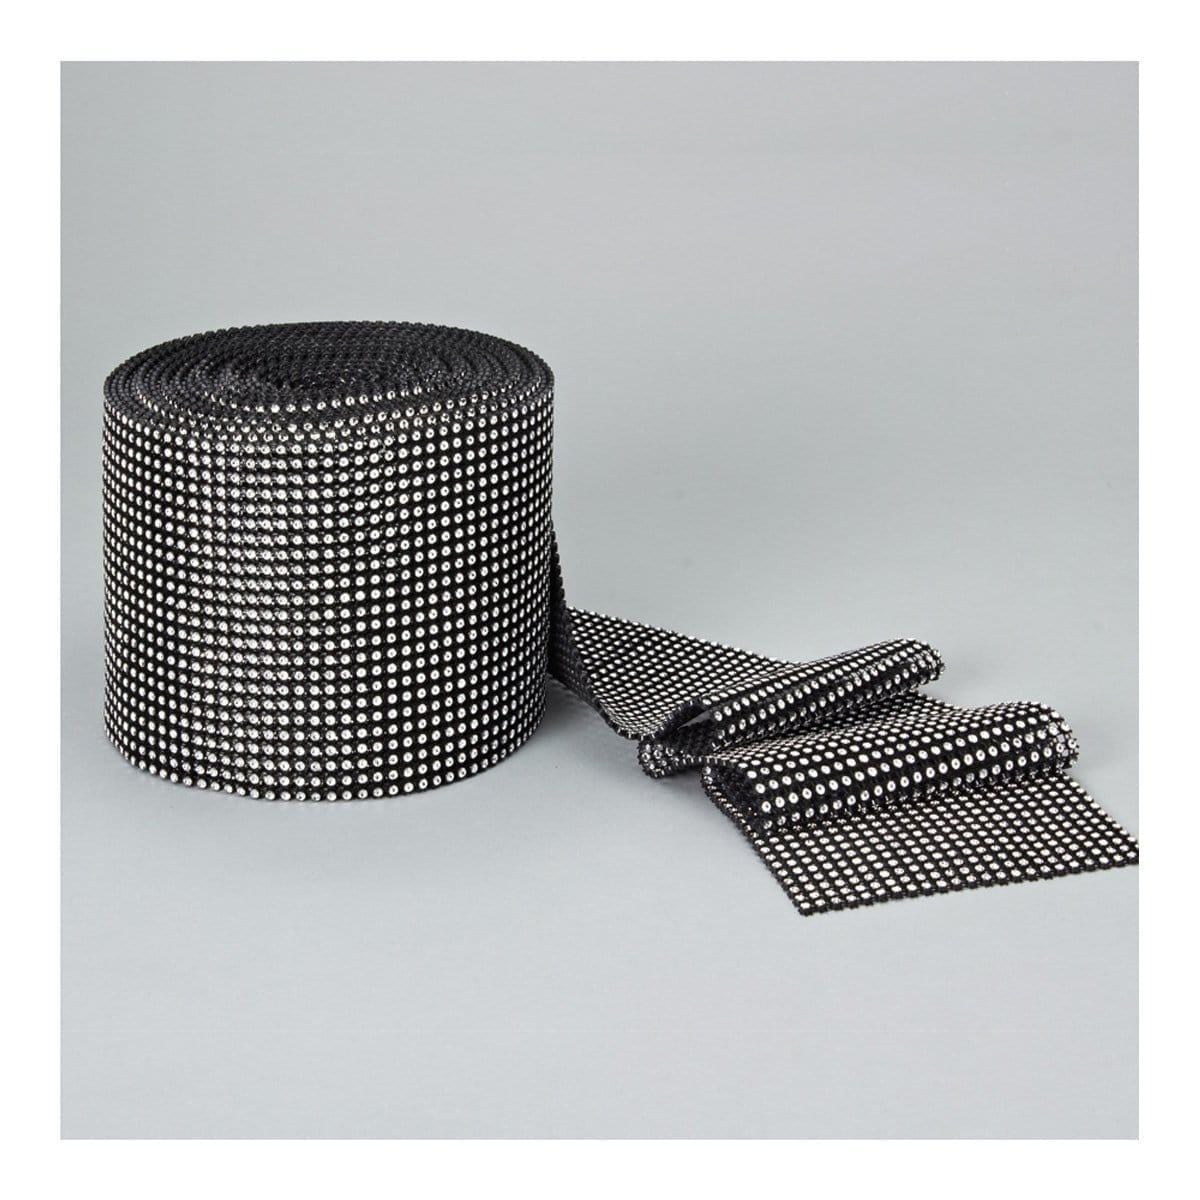 Buy Decorations Diamond Mesh Roll - Black/Silver 4 5/8 in. x 10 yds sold at Party Expert